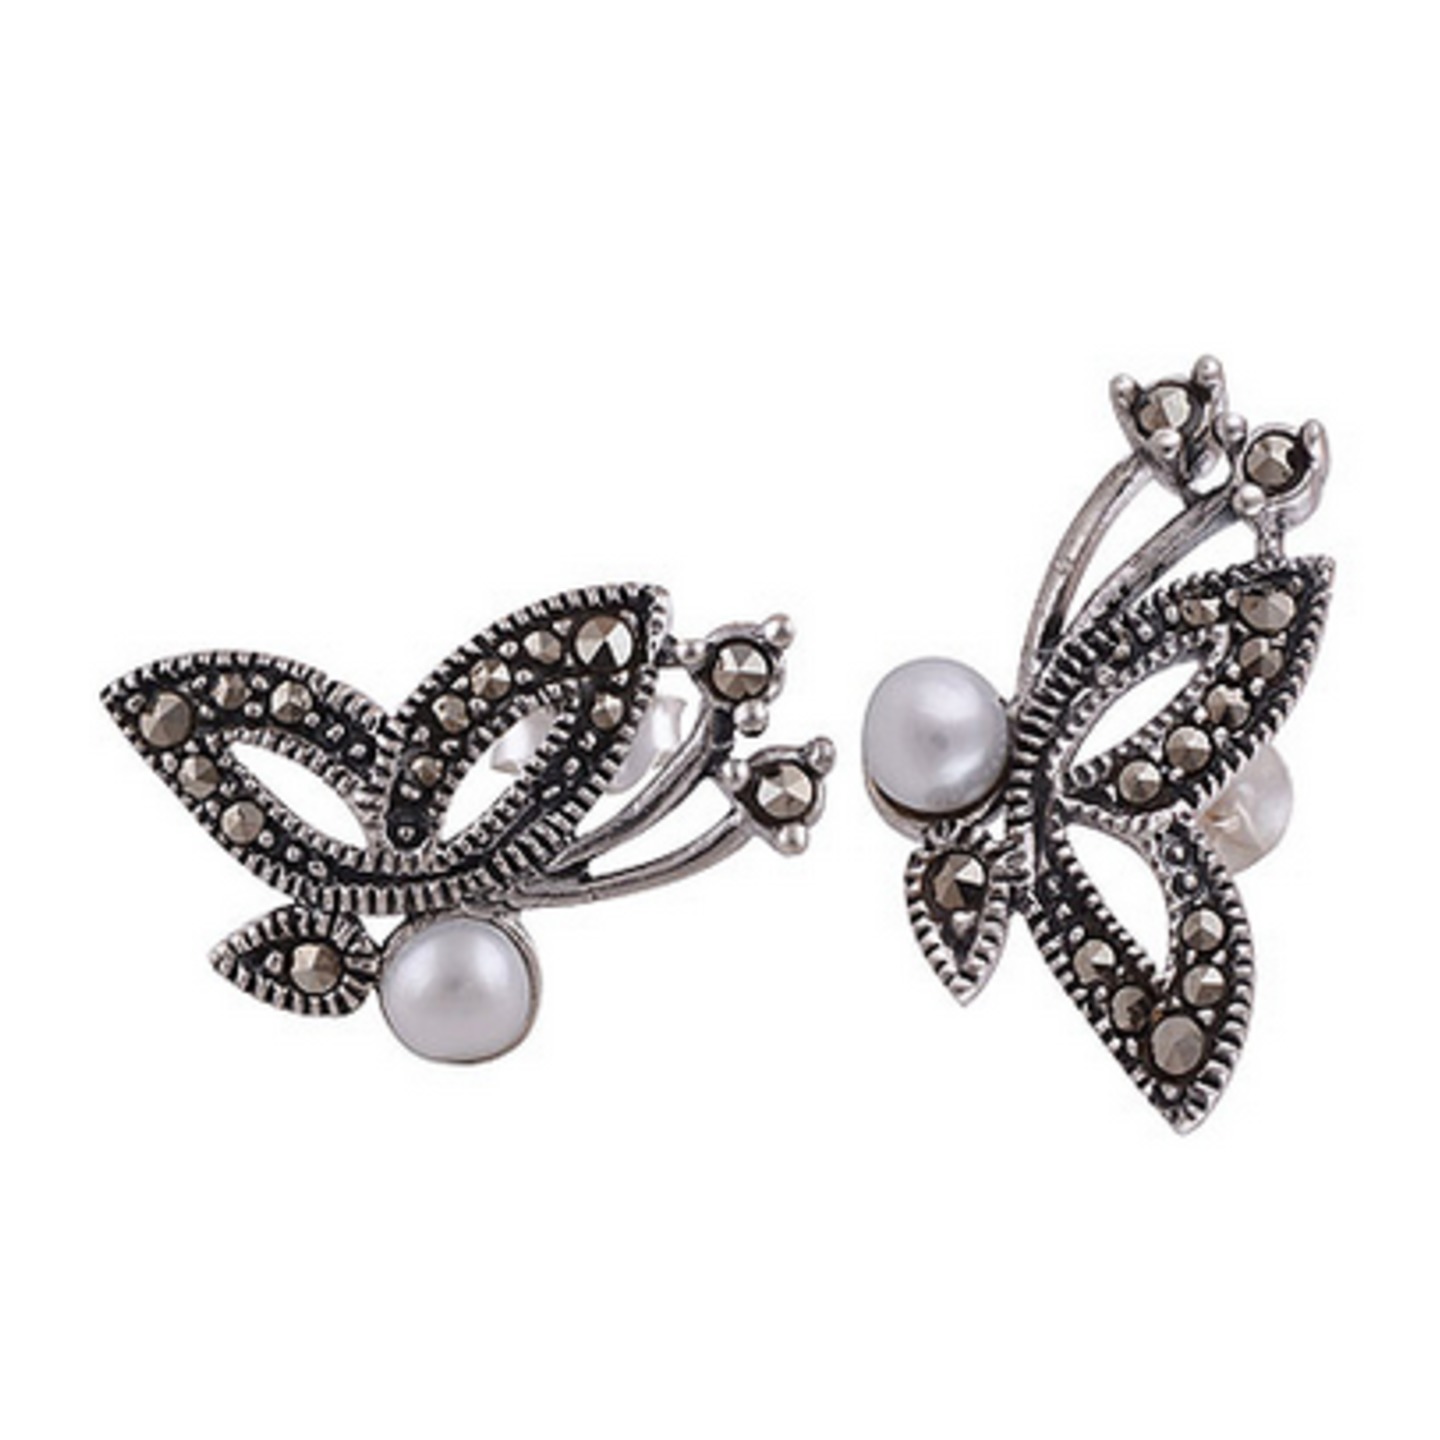 The Marcasite & Pearl Cut Stone Studs